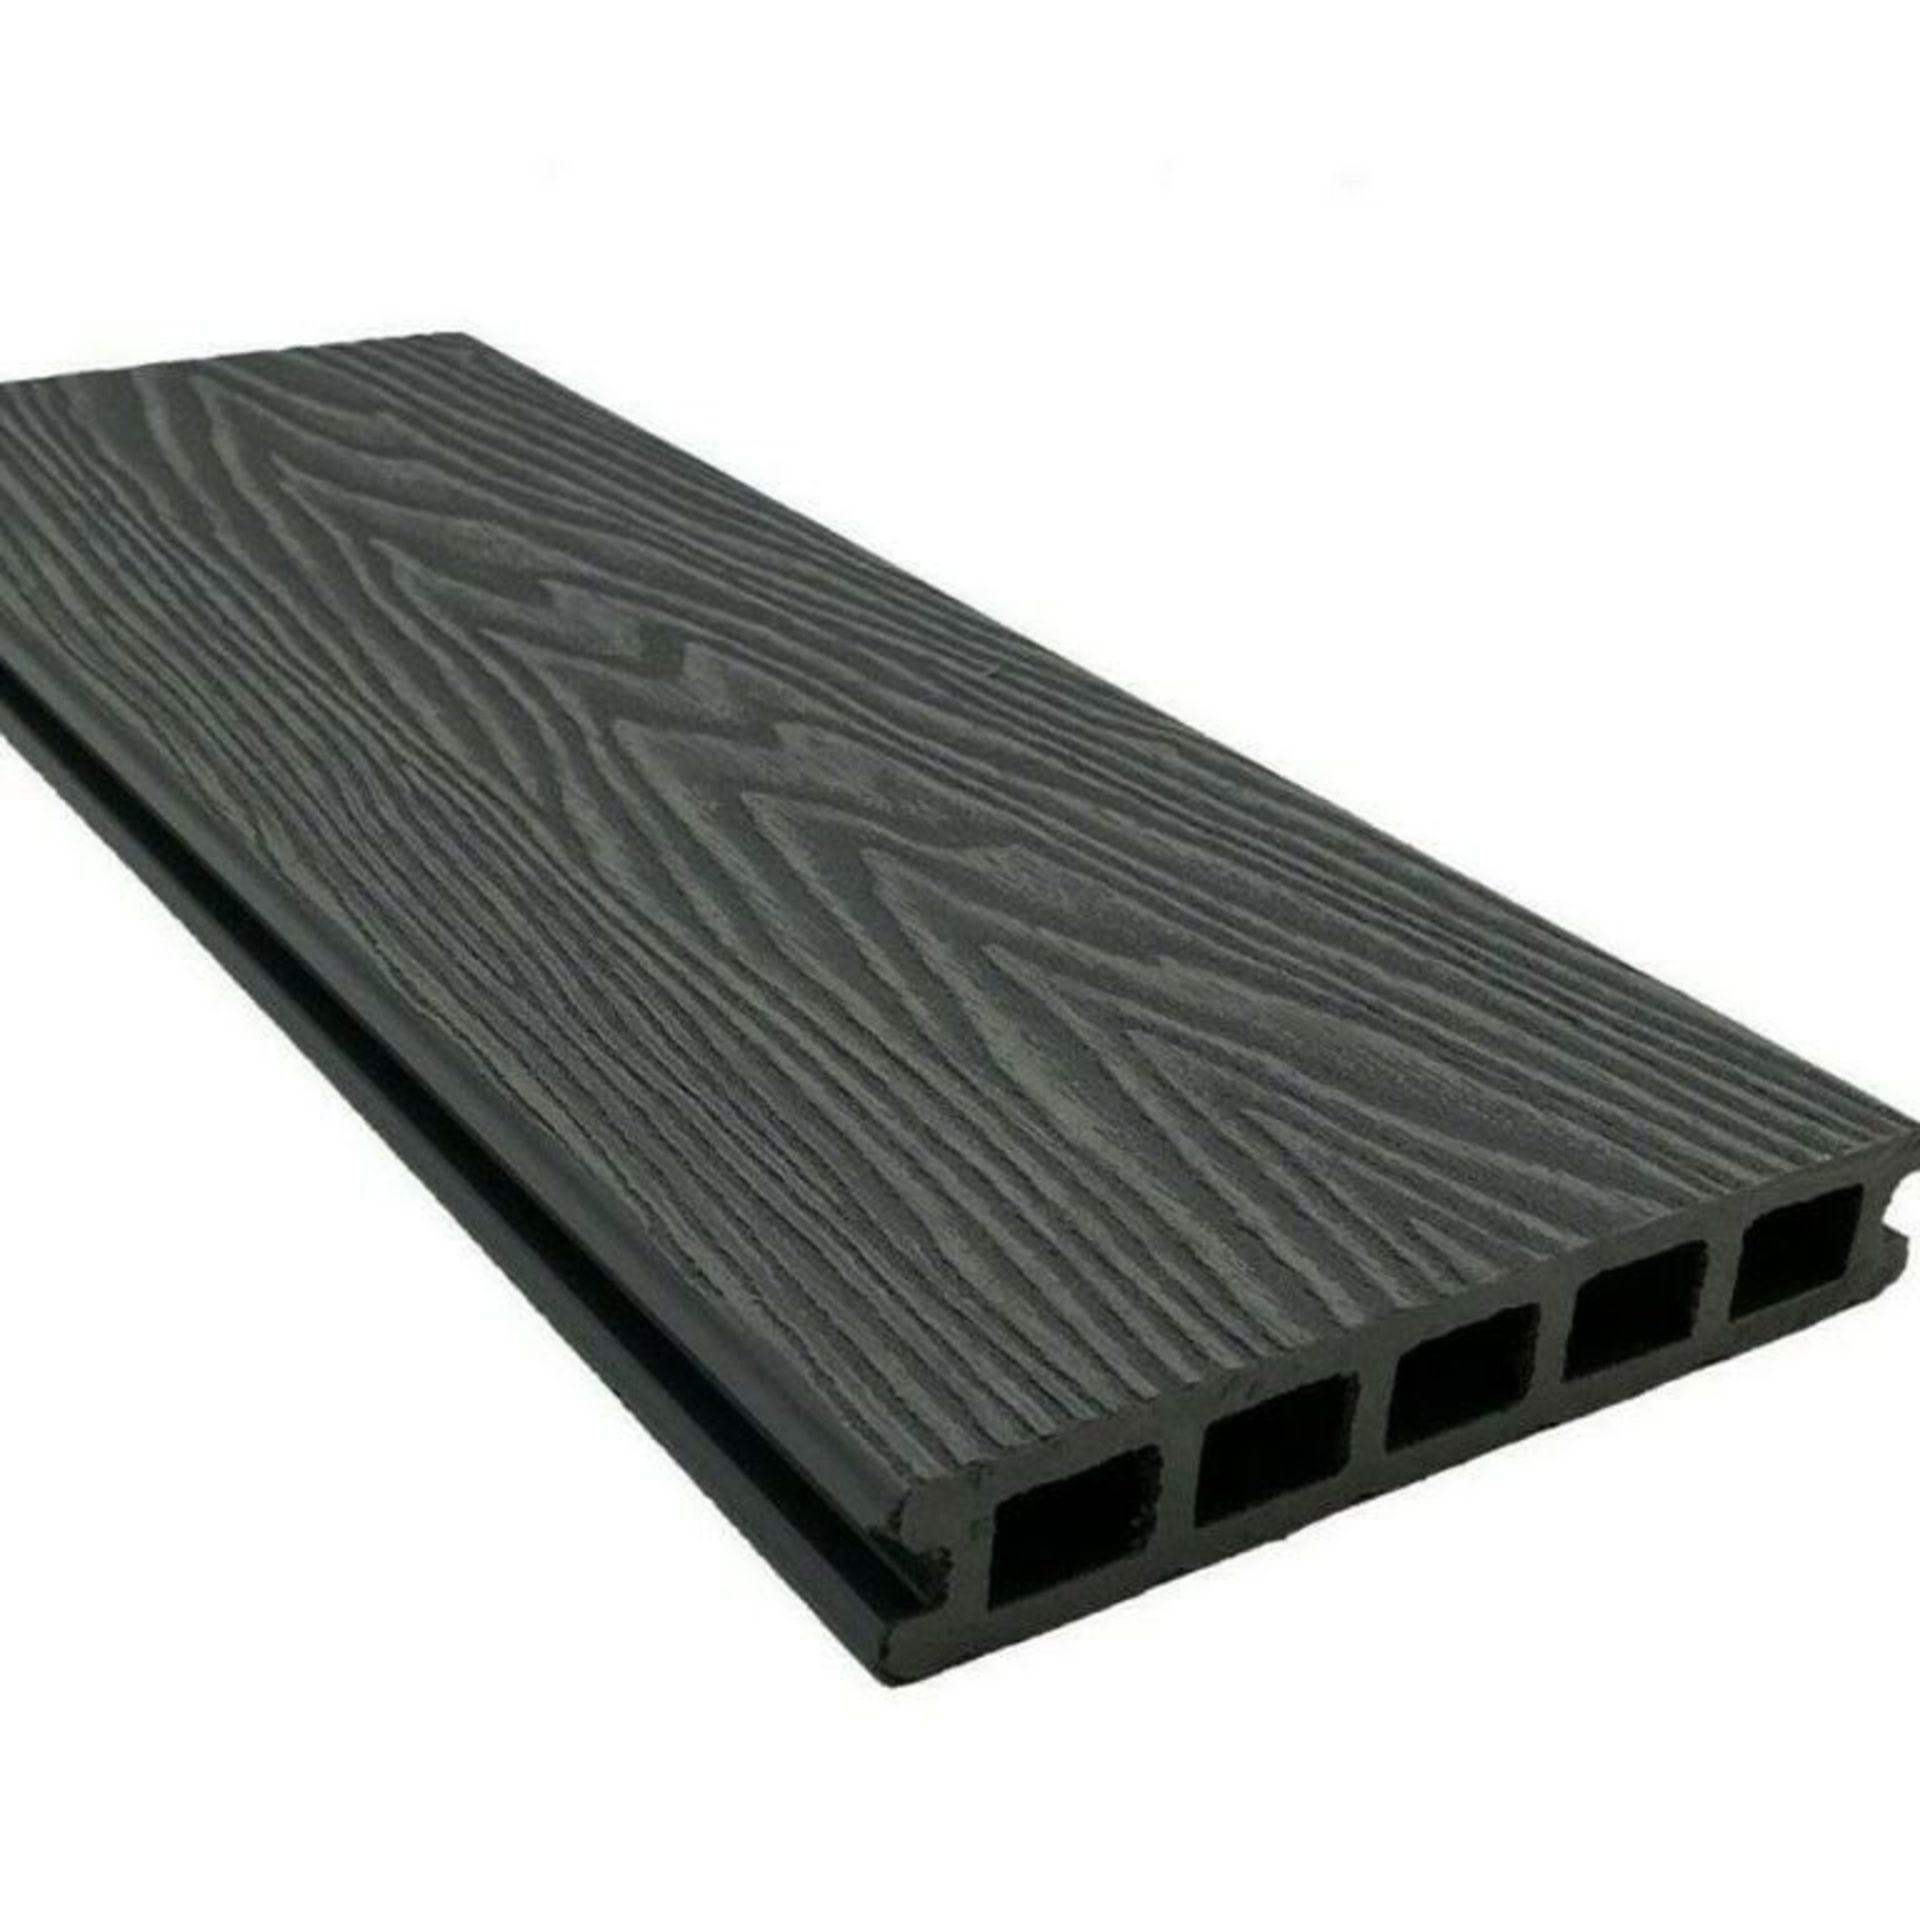 10x Composite Decking boards colour Weathered Ash